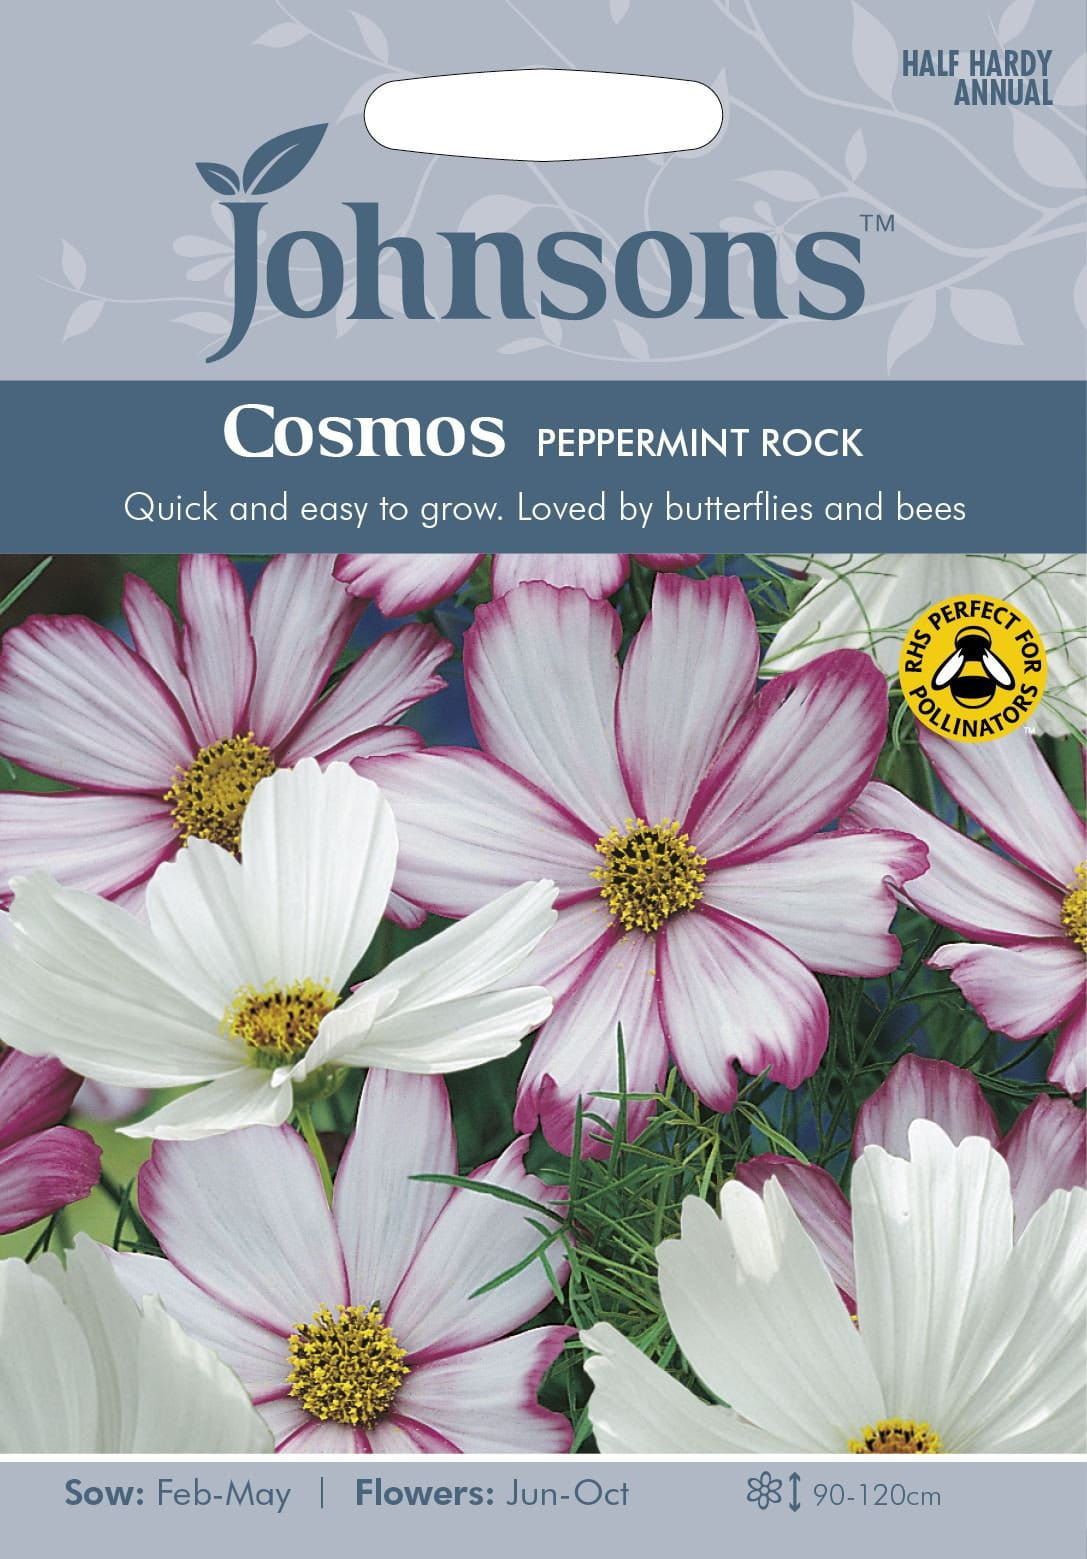 Johnsons Cosmos Peppermint Rock 60 Seeds